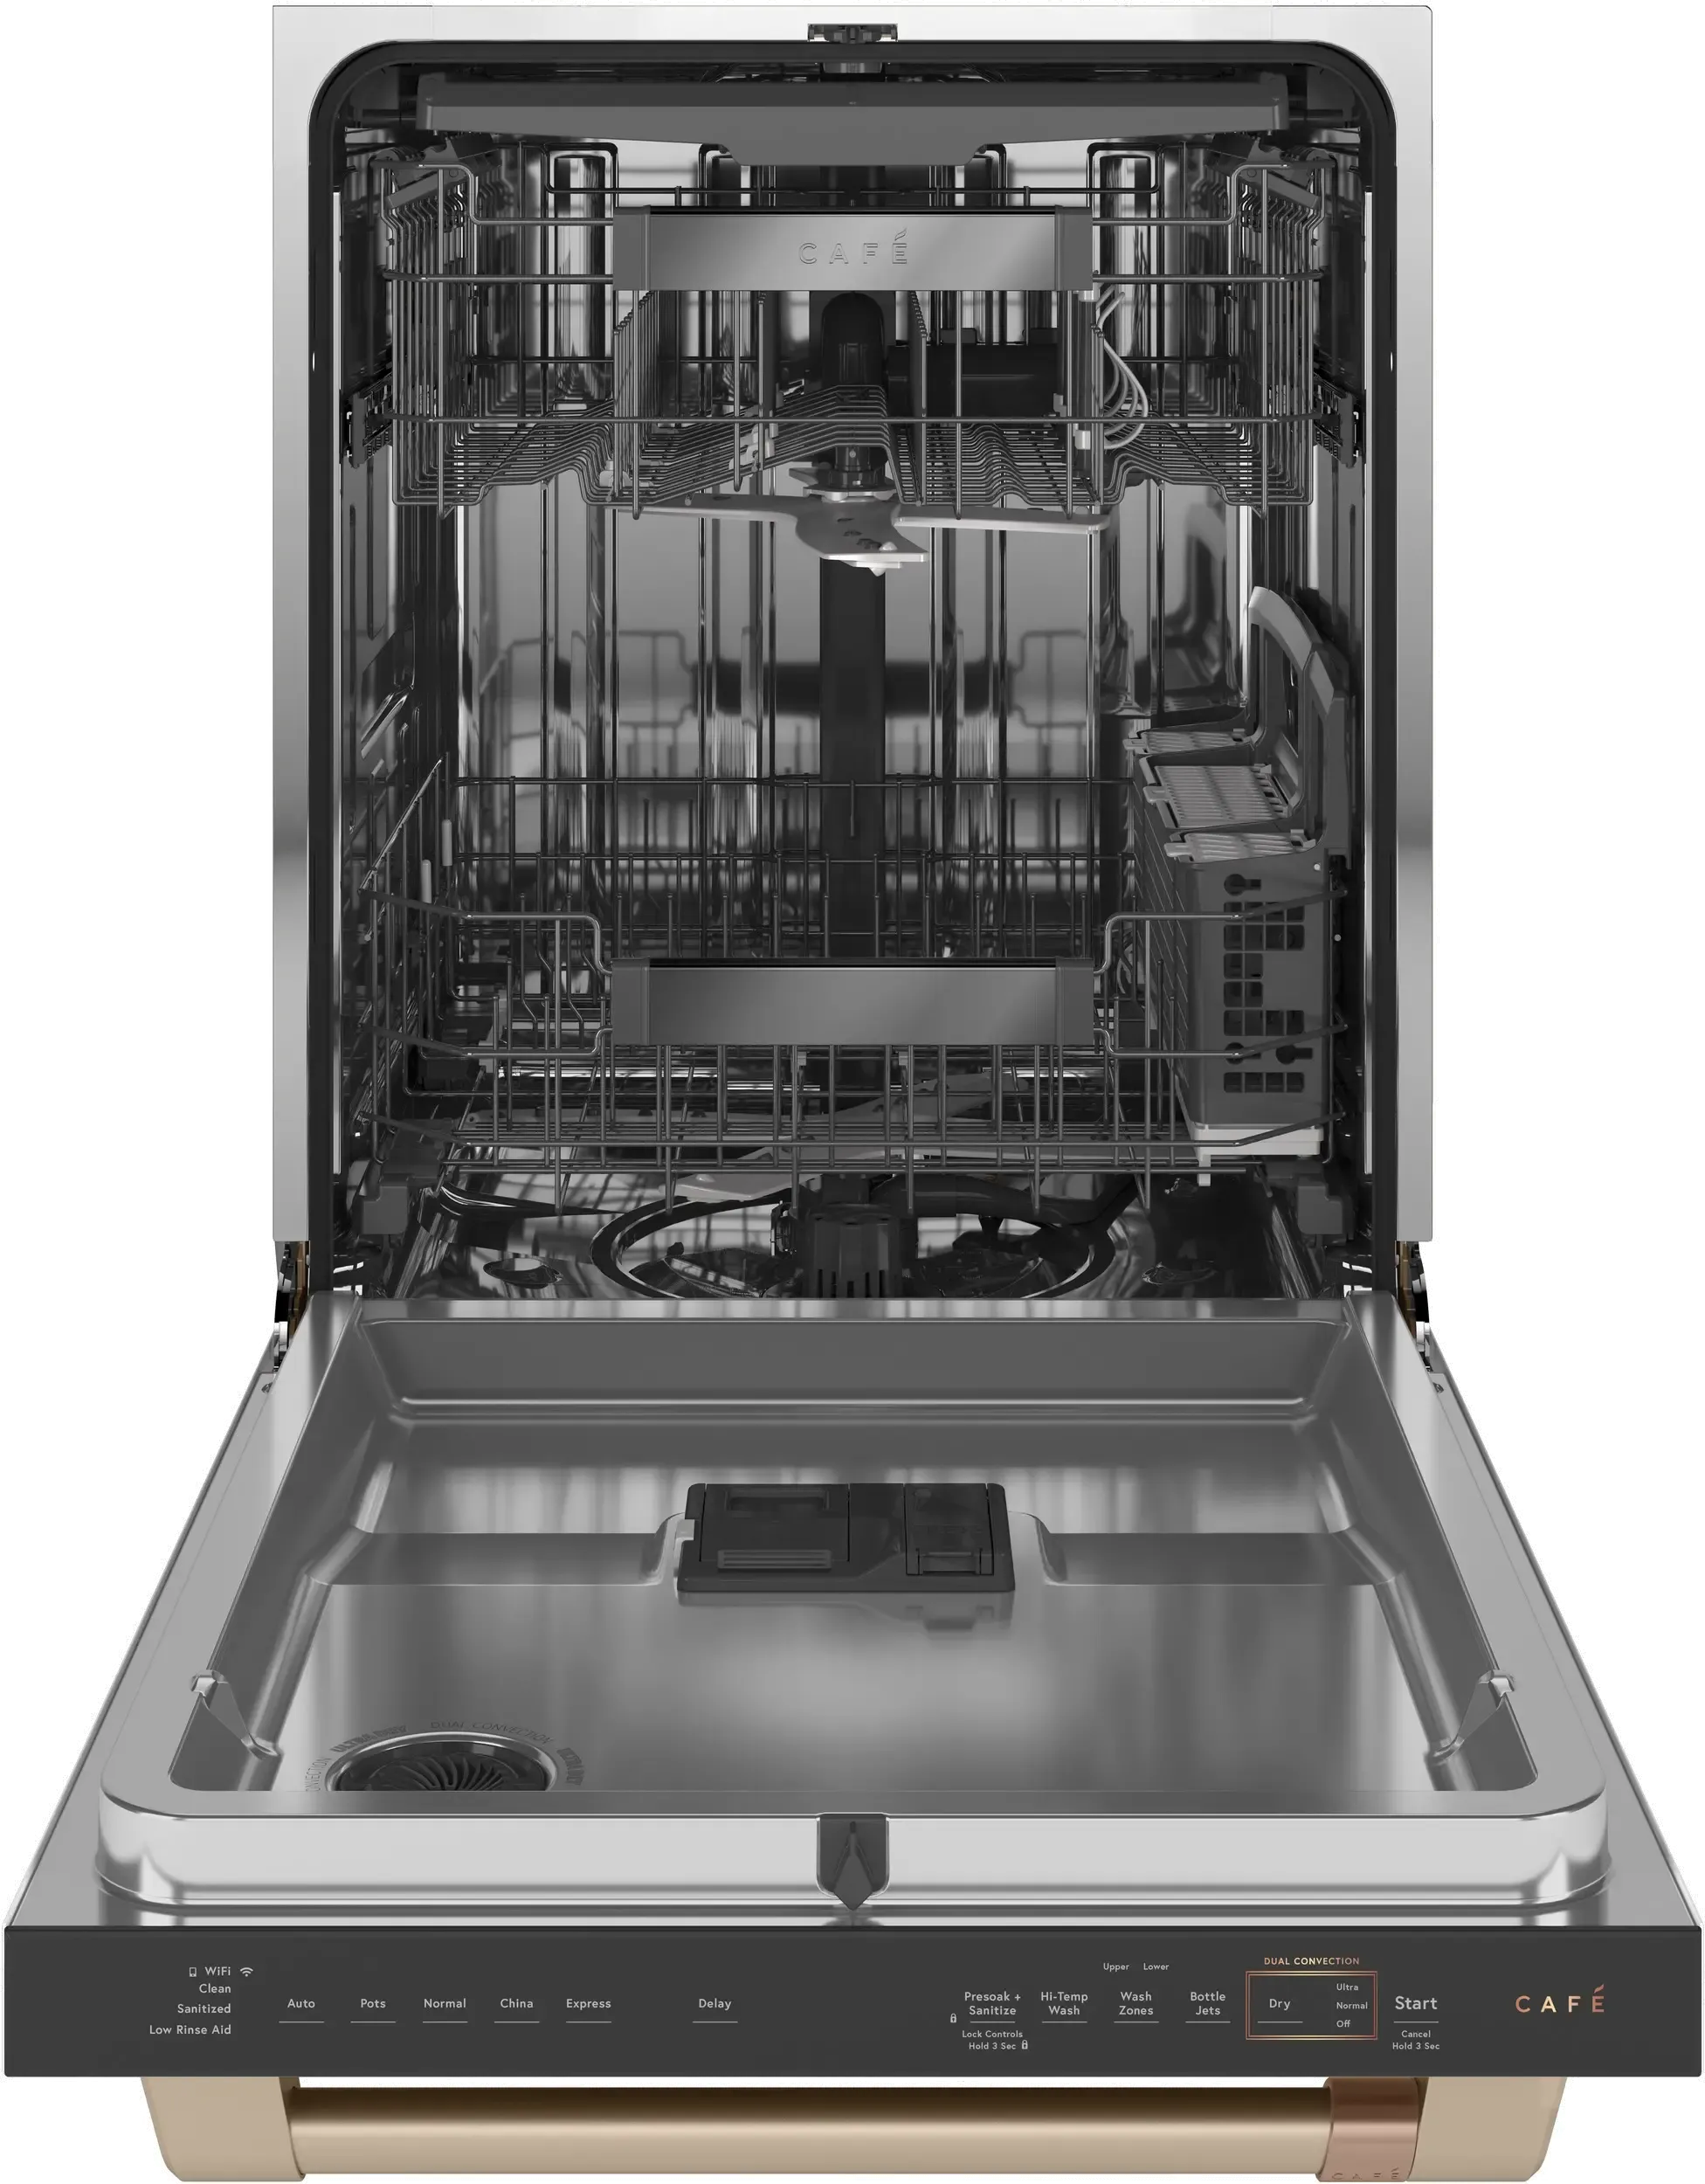 GE Cafe Top Control Dishwasher CDT875P4NW2